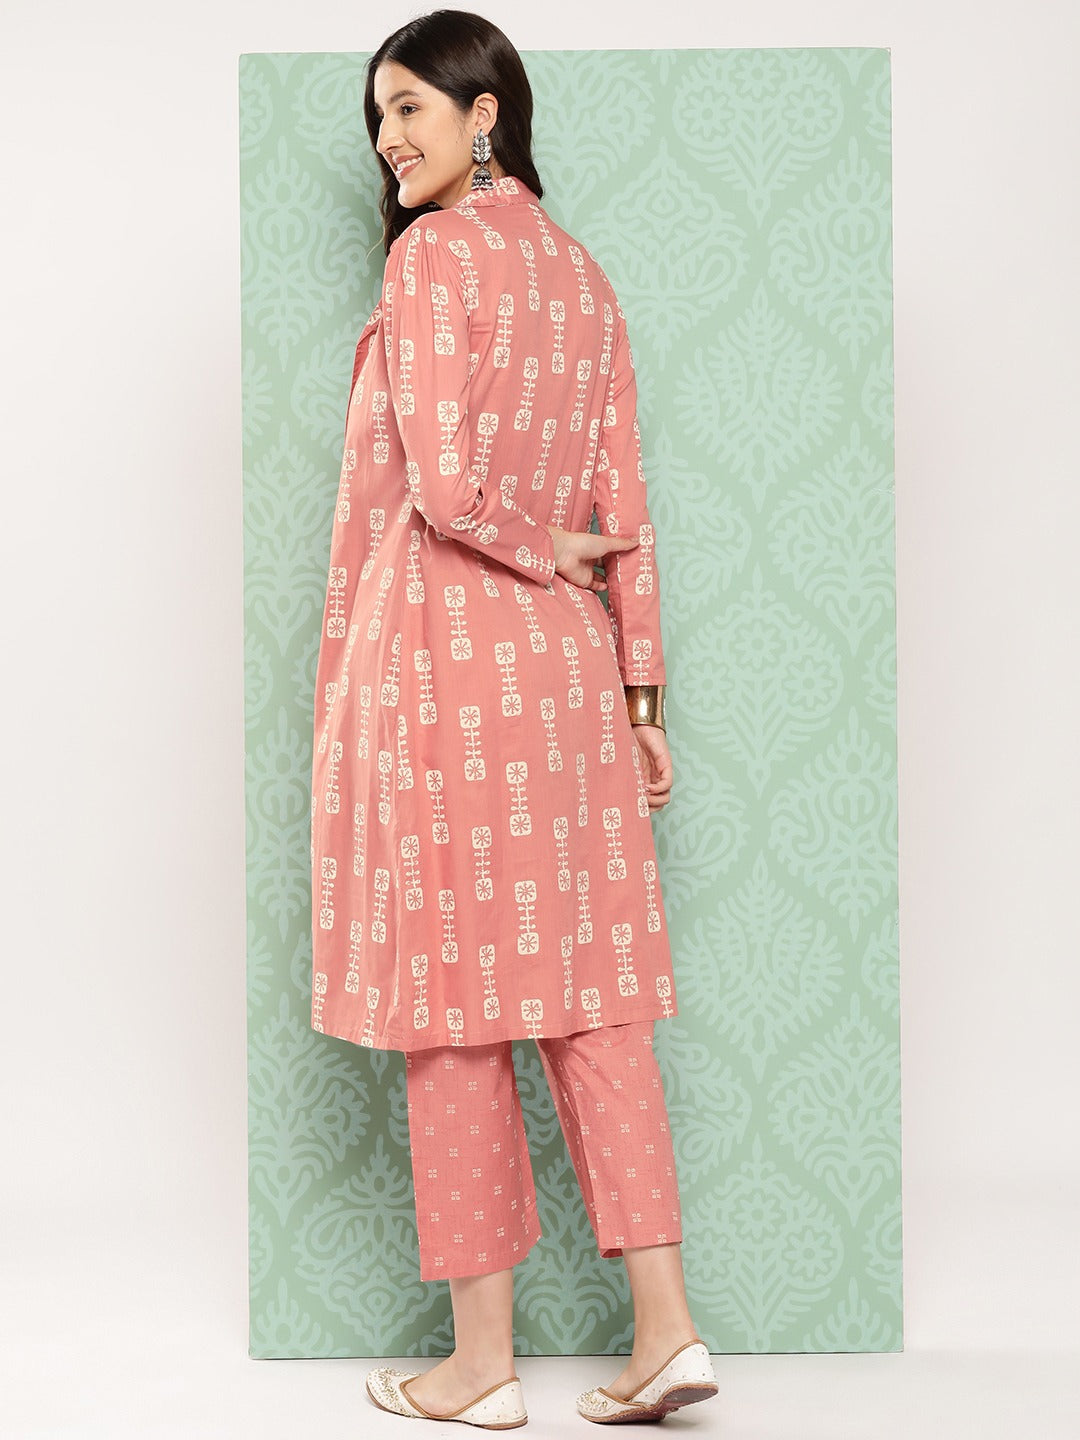 Peach Printed Cotton Top with Trousers with Shrug-Yufta Store-1520CRDPCS